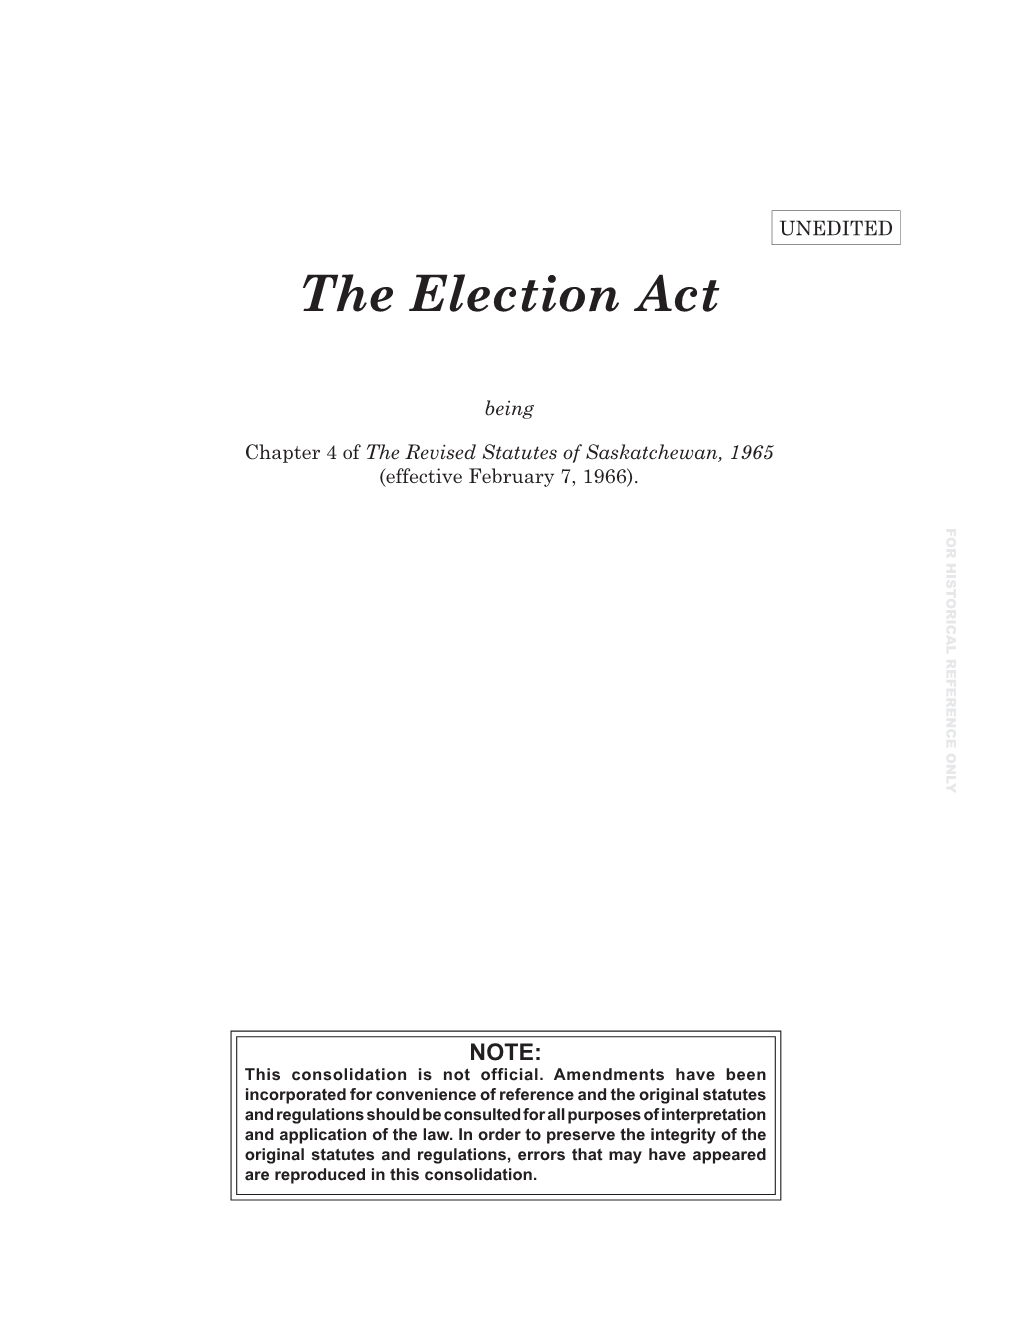 The Election Act the Election This Consolidation Is Not Official